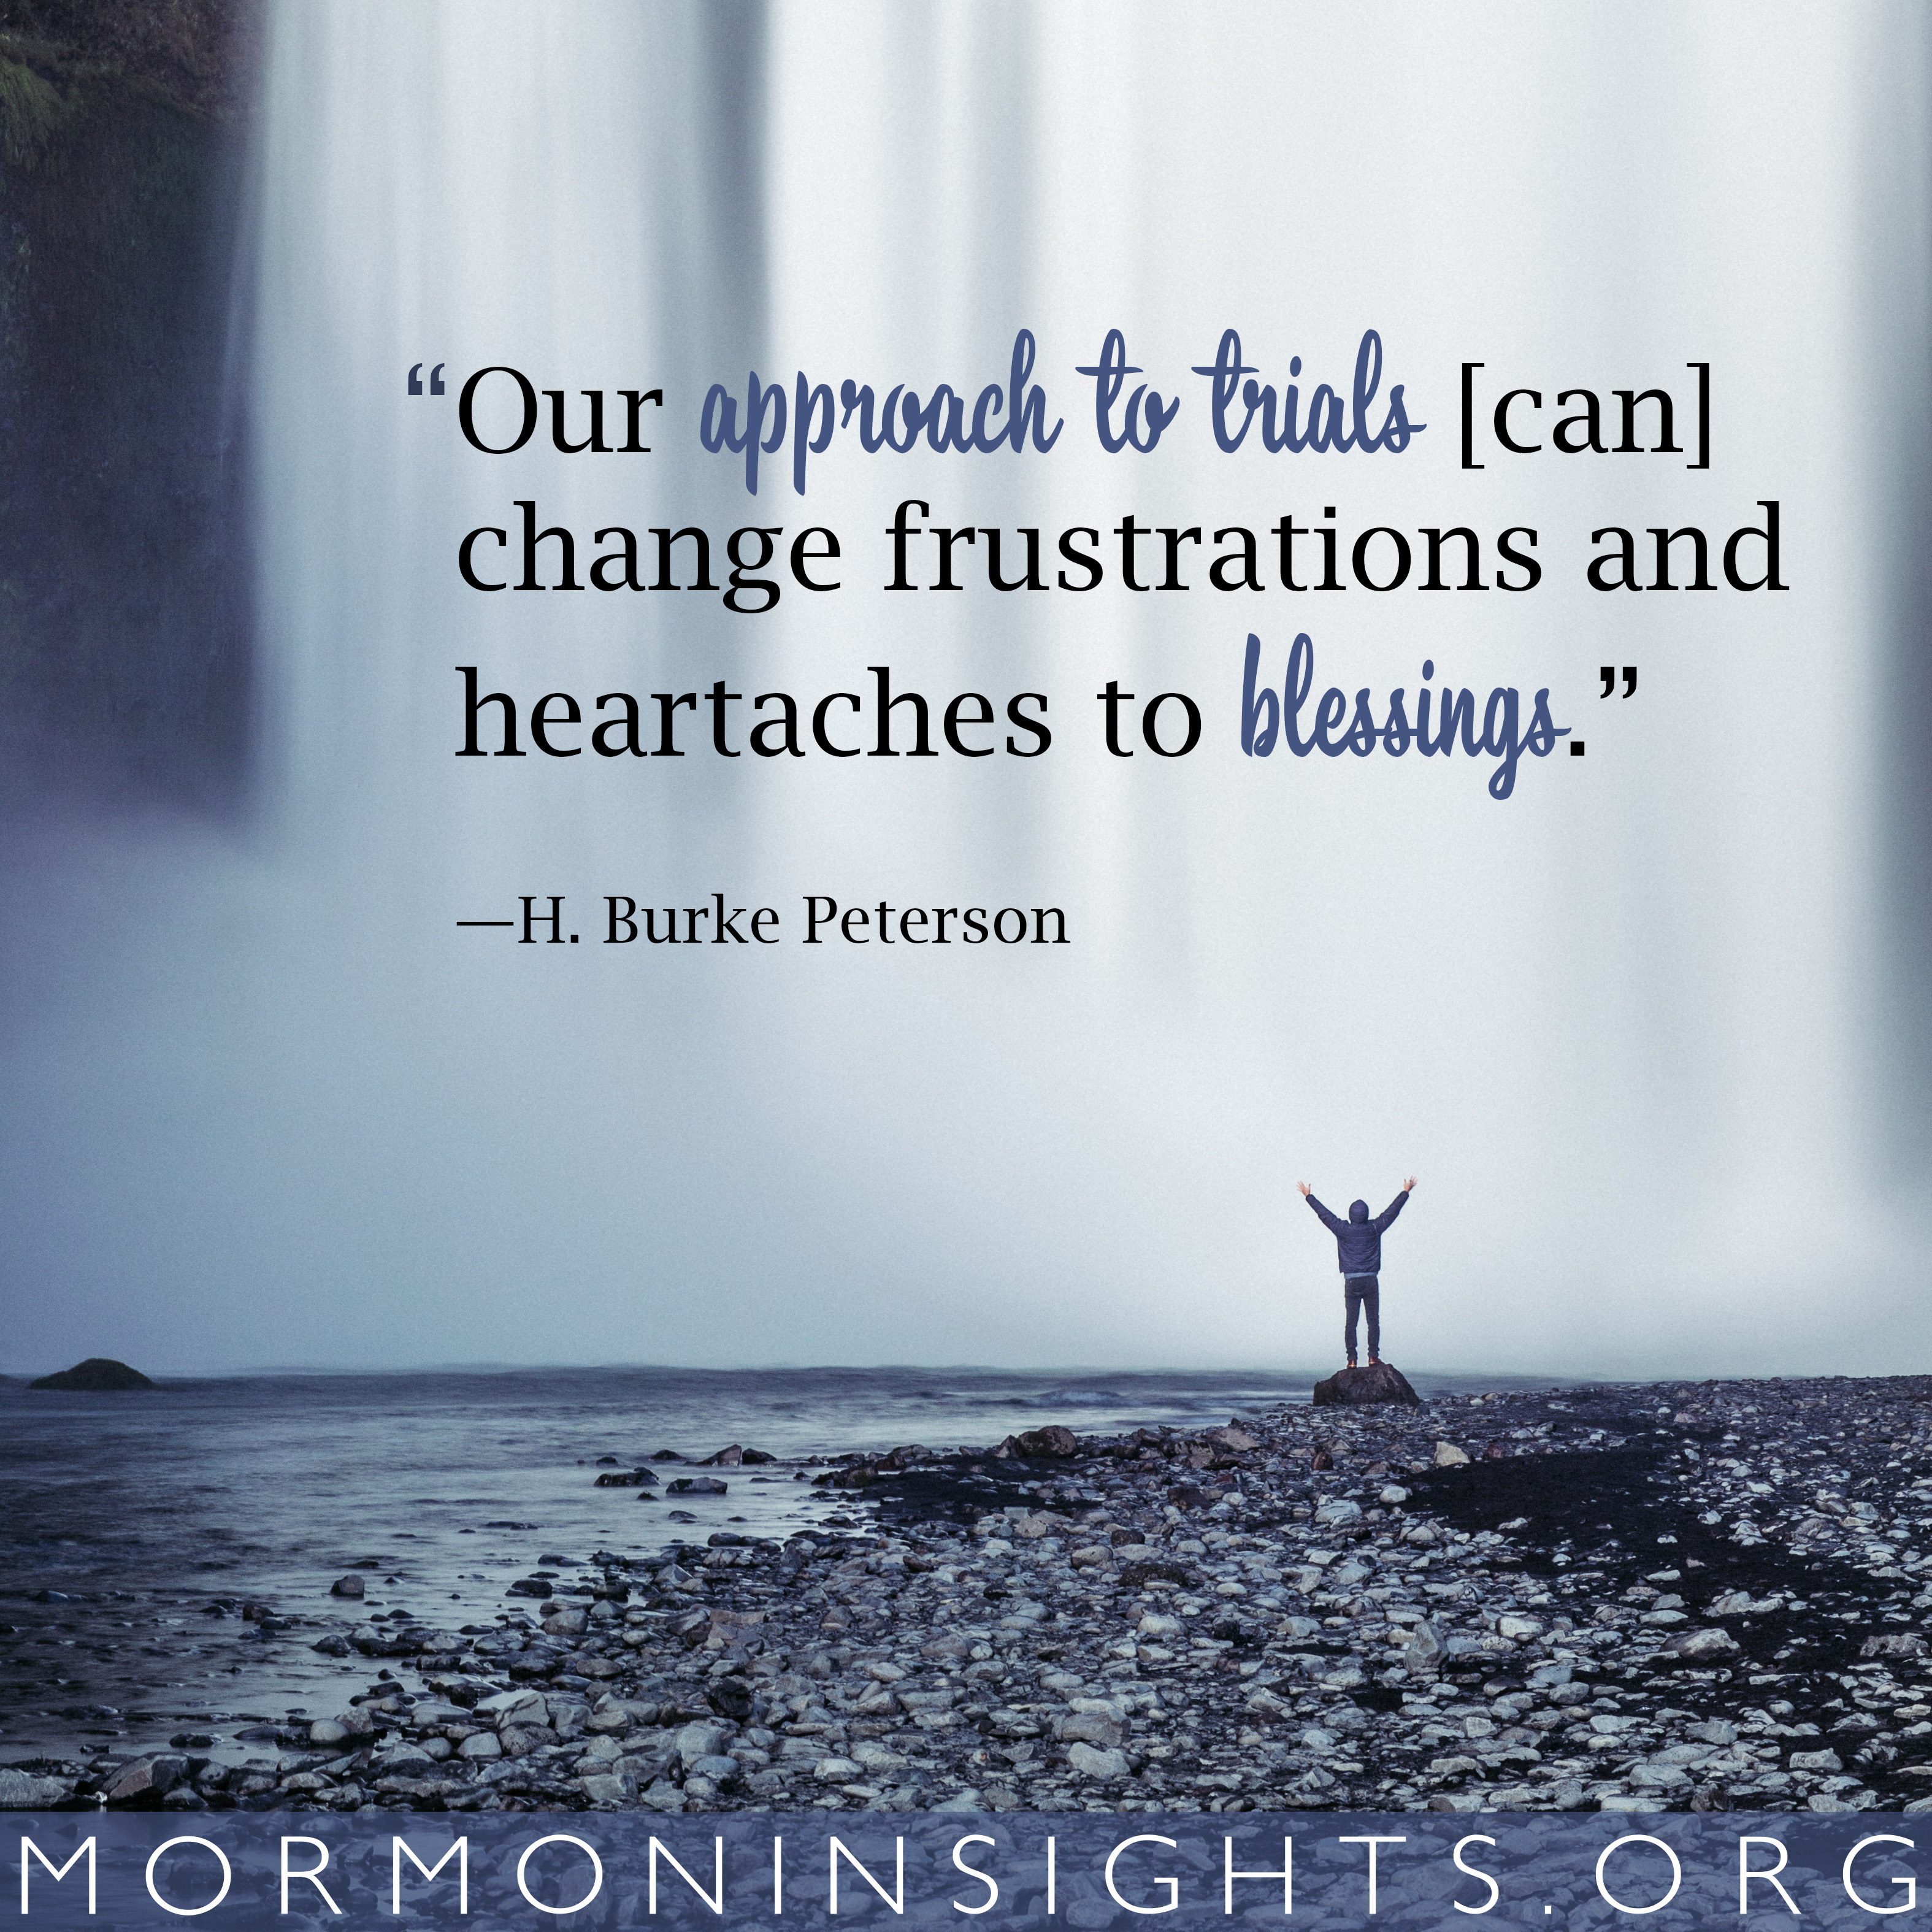 "Our approach to trials [can] change frustrations and heartaches to blessings."